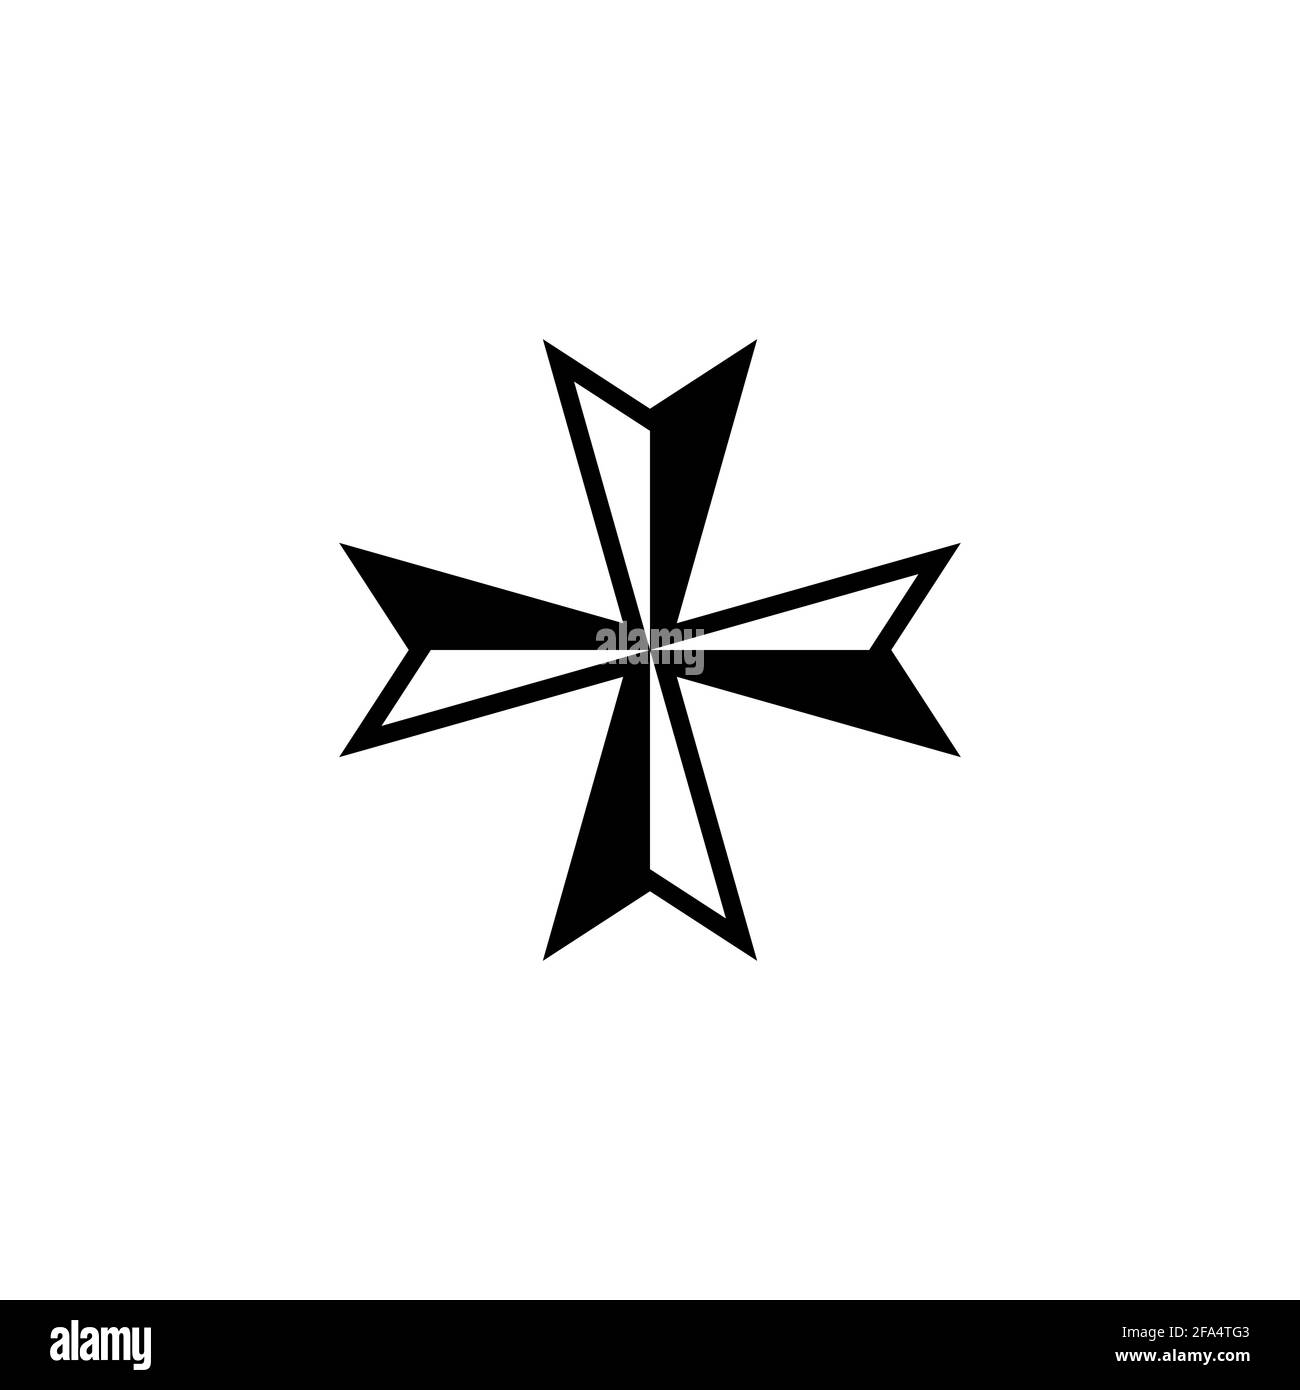 Maltese cross Black and White Stock Photos & Images - Alamy